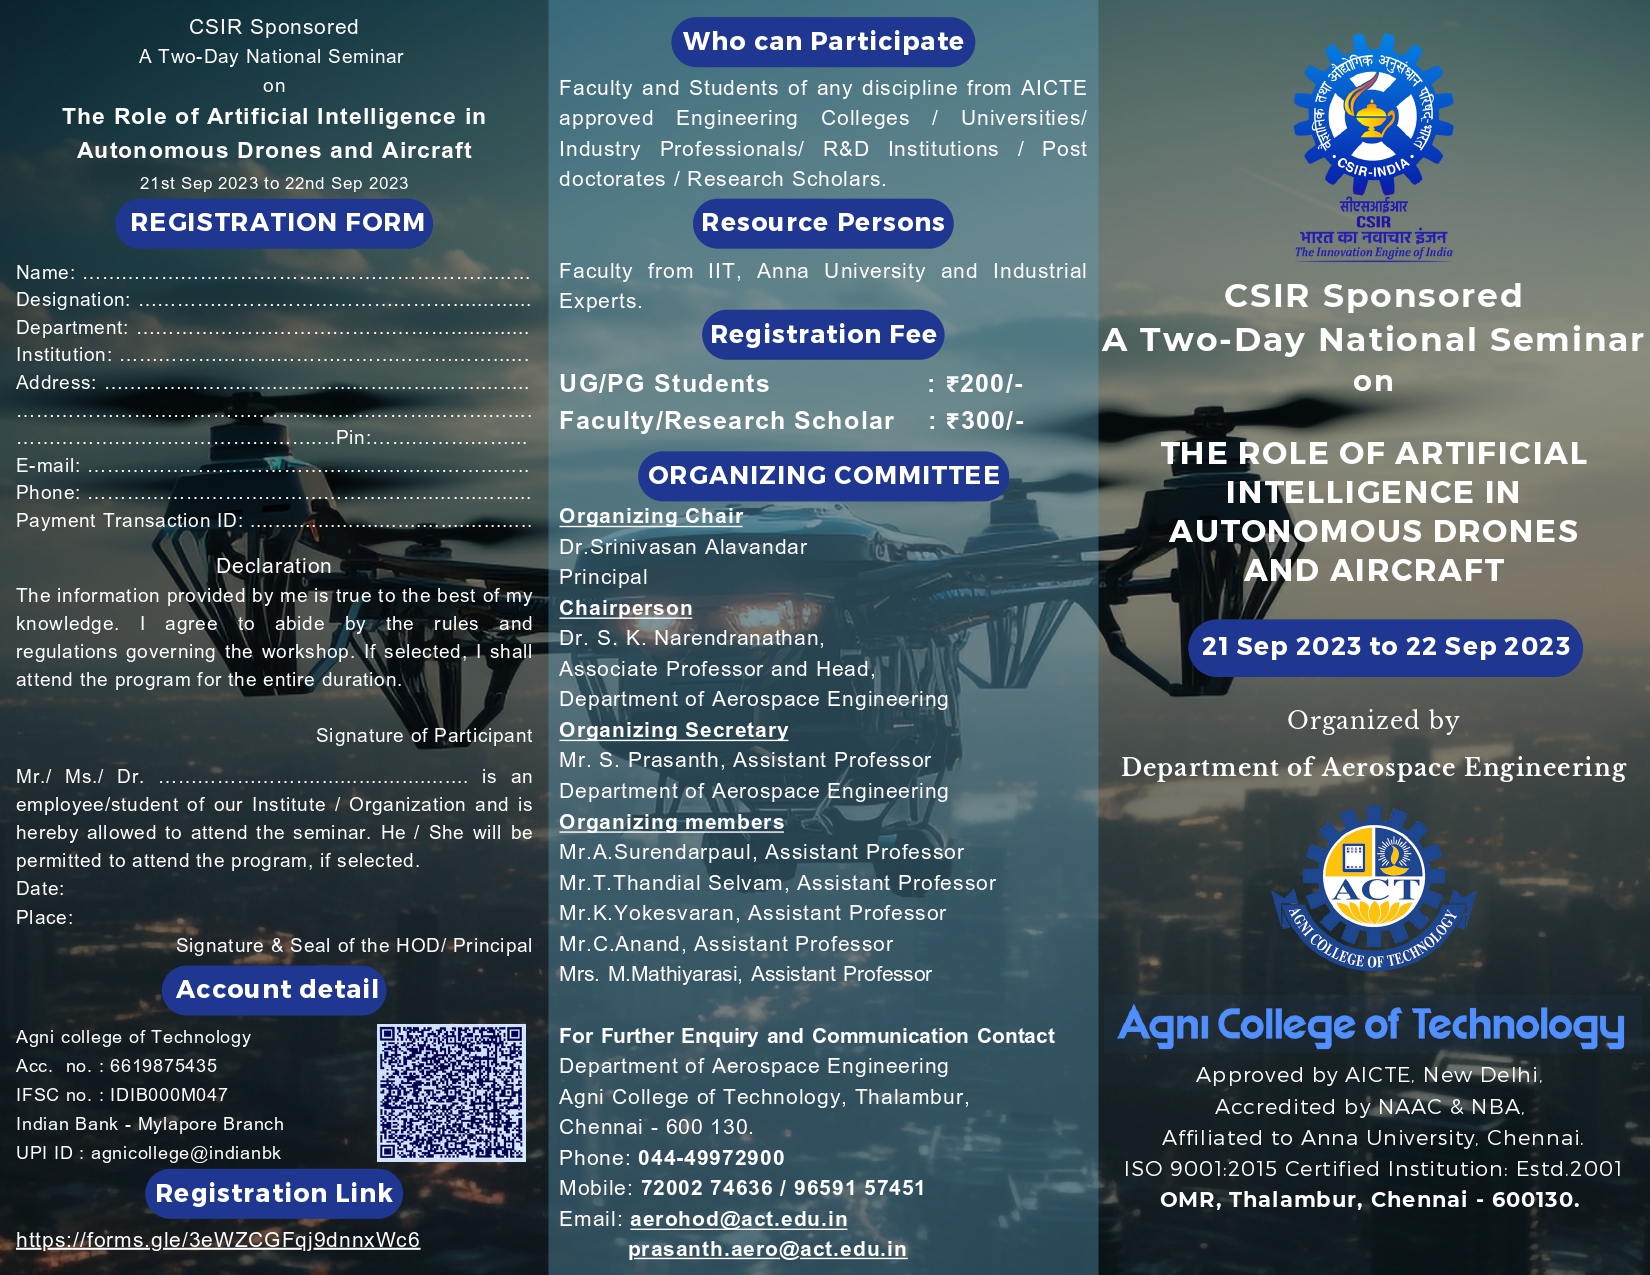 A Two Day National Seminar on The Role of AI in Autonomous Drones and Aircrafts